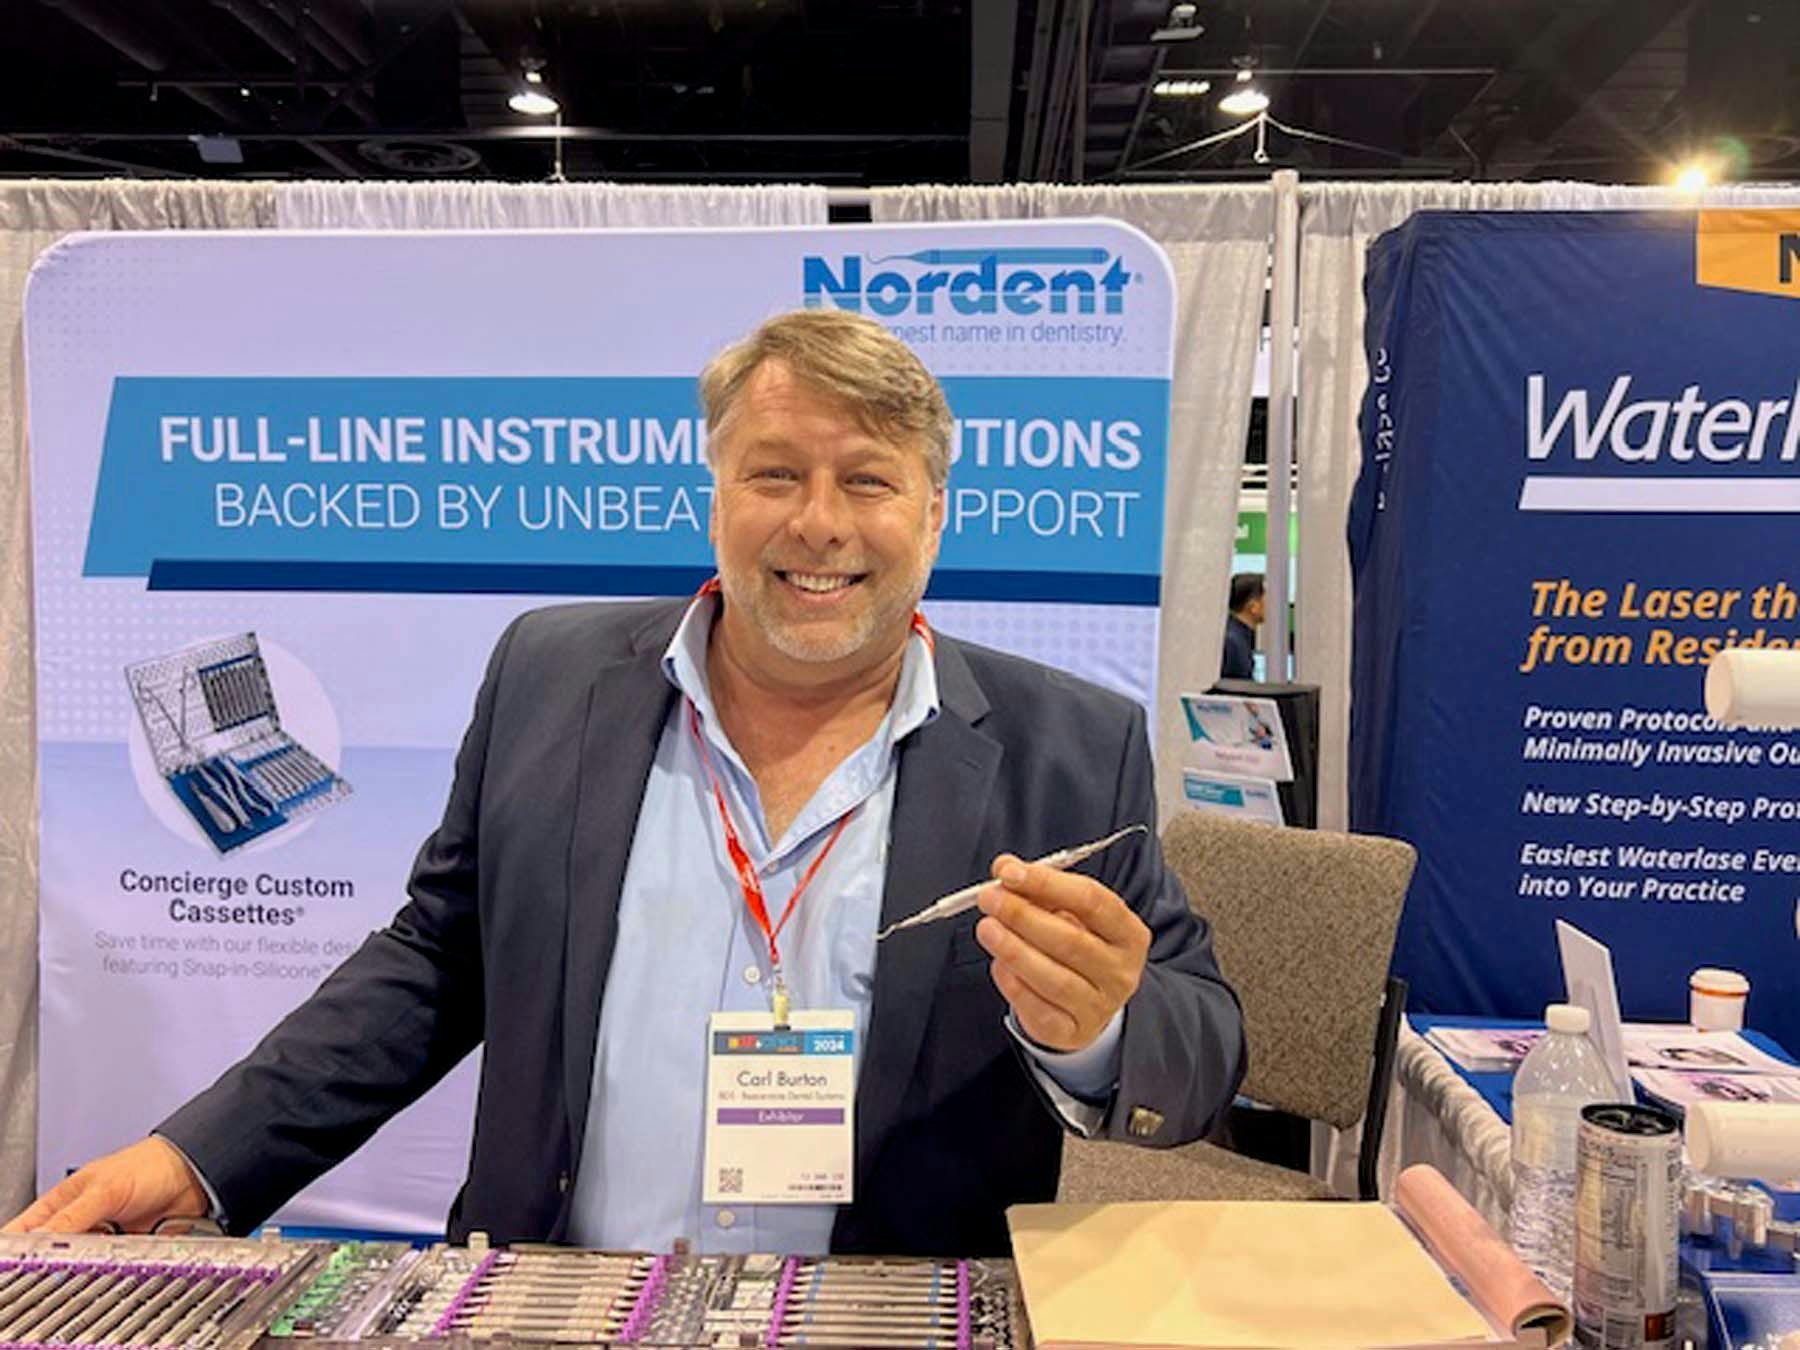 Carl Burton shows off a new line of Hartzell dental instruments at the Nordent Instruments booth on Thursday. | Image Credit: © Stan Goff